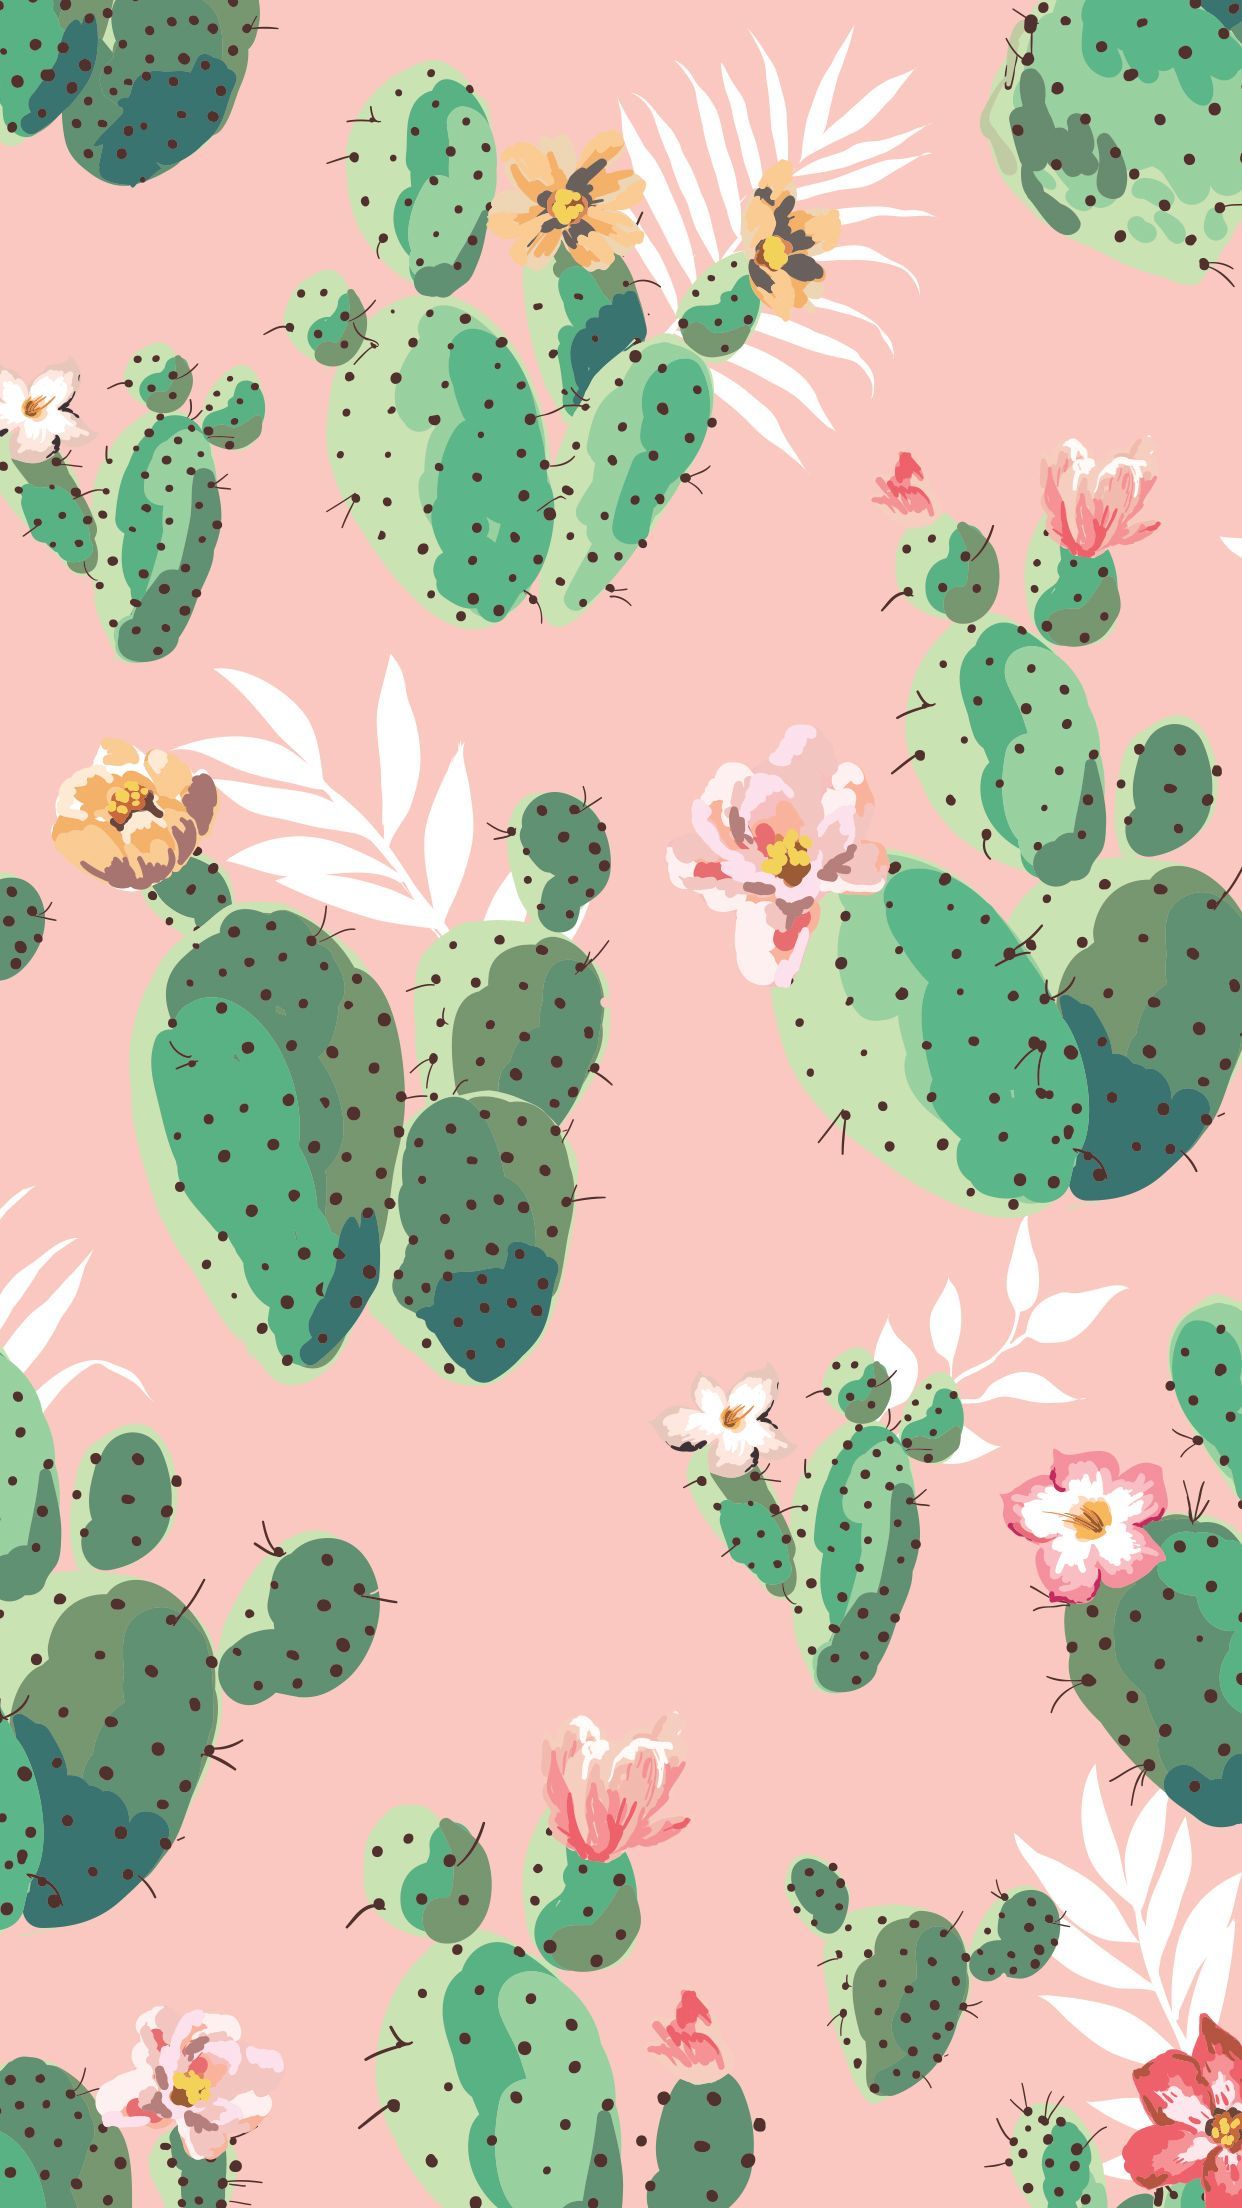 Pink and green cactus iphone wallpaper. iPhone wallpaper, Mobile wallpaper, Cute wallpaper